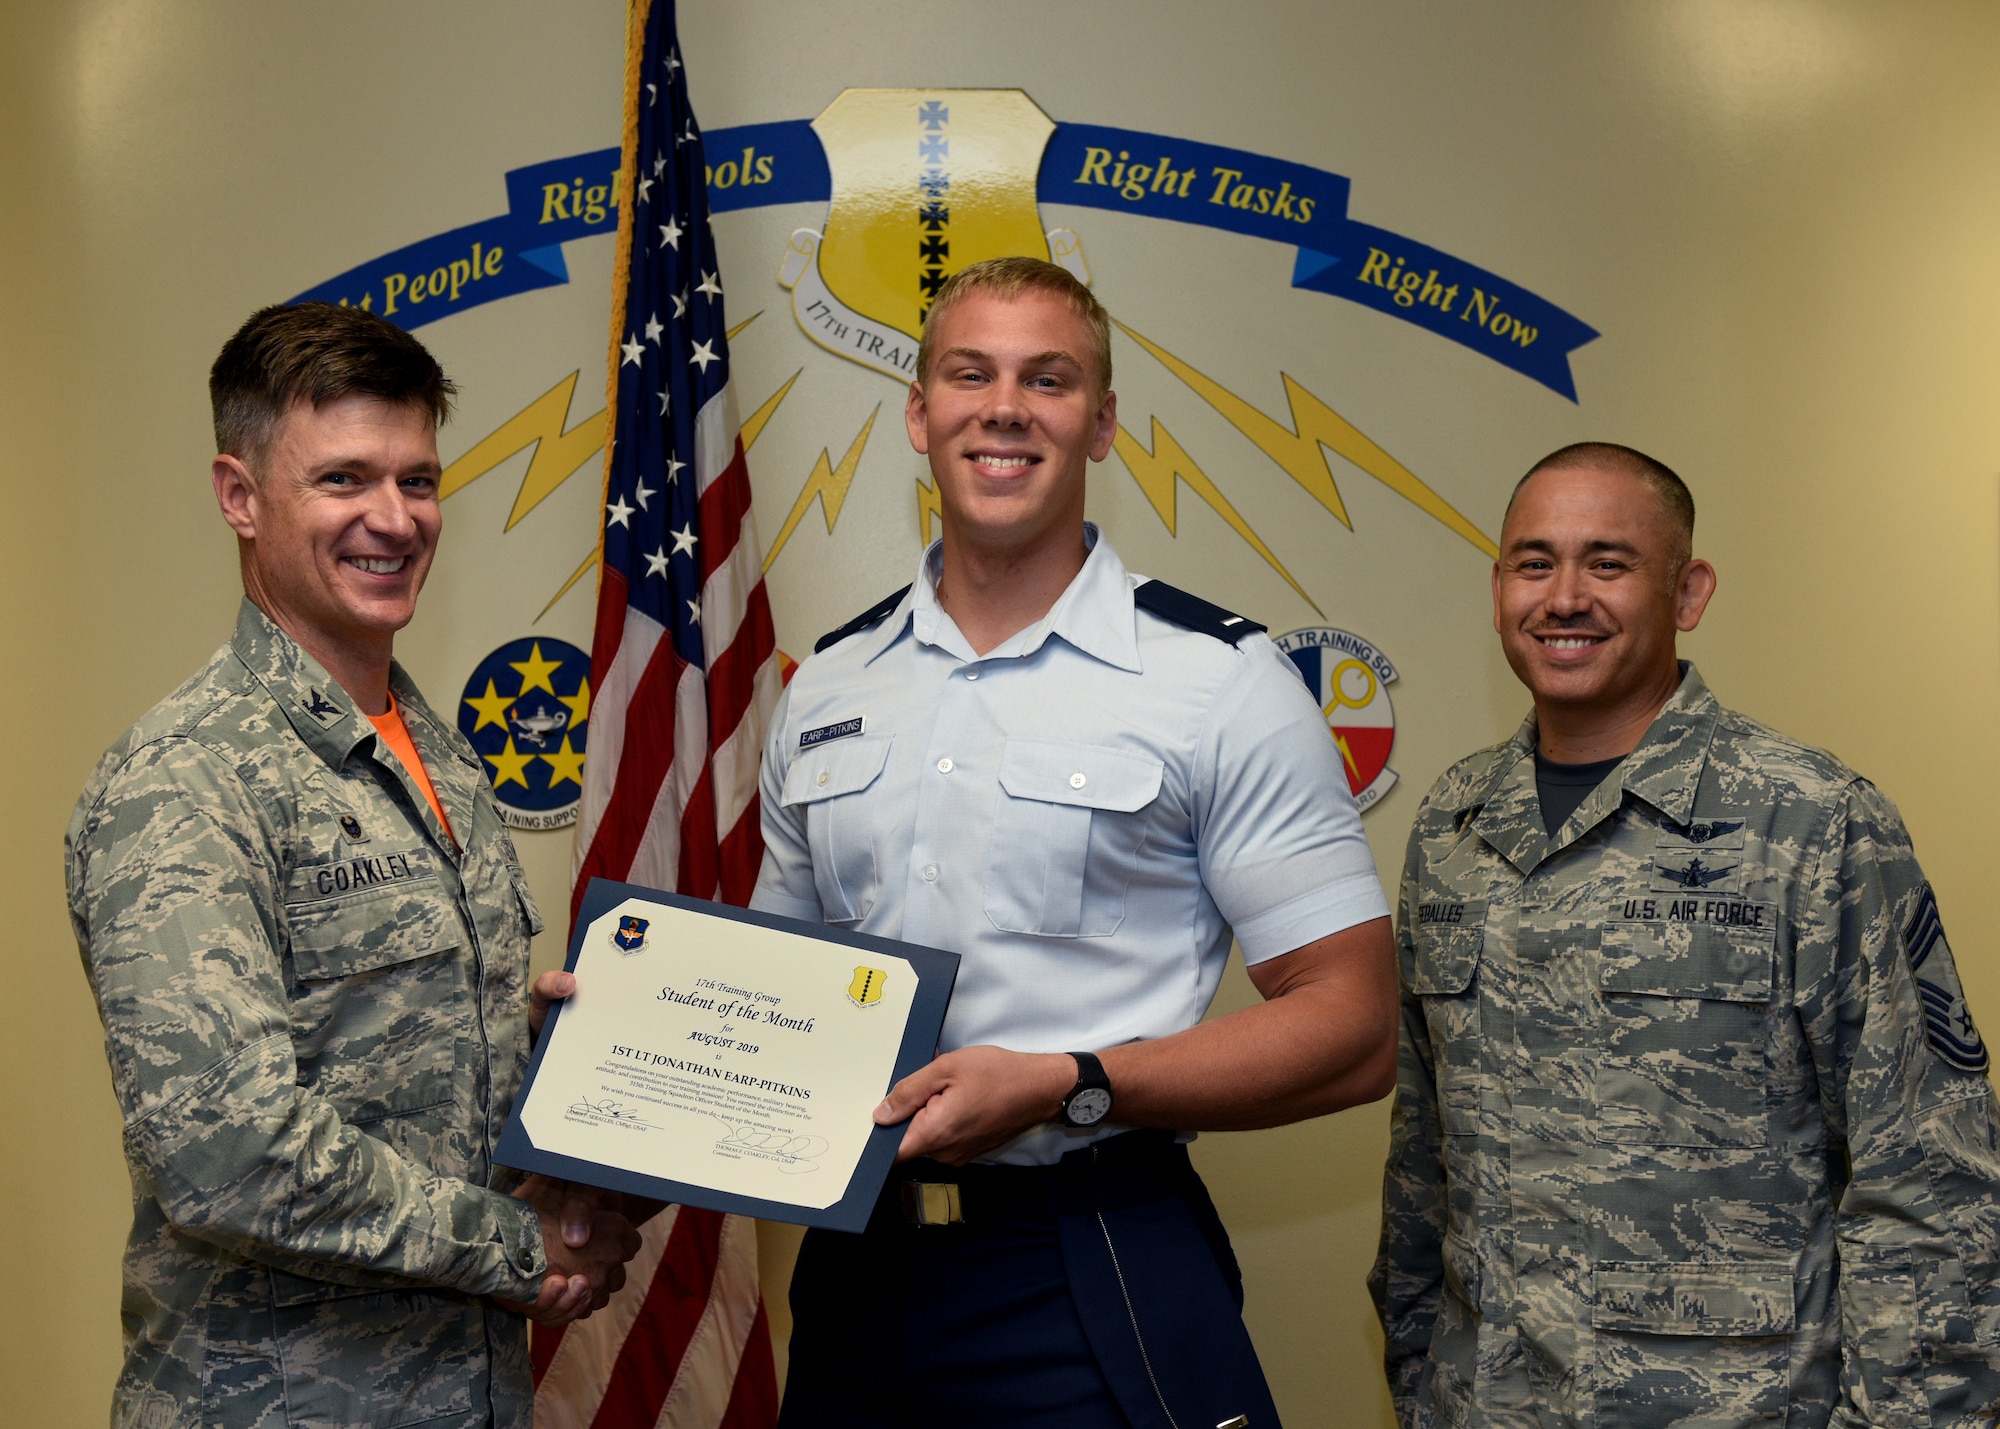 U.S. Air Force Col. Thomas Coakley, 17th Training Group commander, presents the 315th Training Squadron Student of the Month award to 1st Lt. Jonathan Earp-Pitkins, 315th TRS student, at Brandenburg Hall on Goodfellow Air Force Base, Texas, September 6, 2019. The 315th TRS’s vision is to develop combat-ready intelligence, surveillance and reconnaissance professionals and promote an innovative squadron culture and identity unmatched across the U.S. Air Force. (U.S. Air Force photo by Airman 1st Class Robyn Hunsinger/Released)